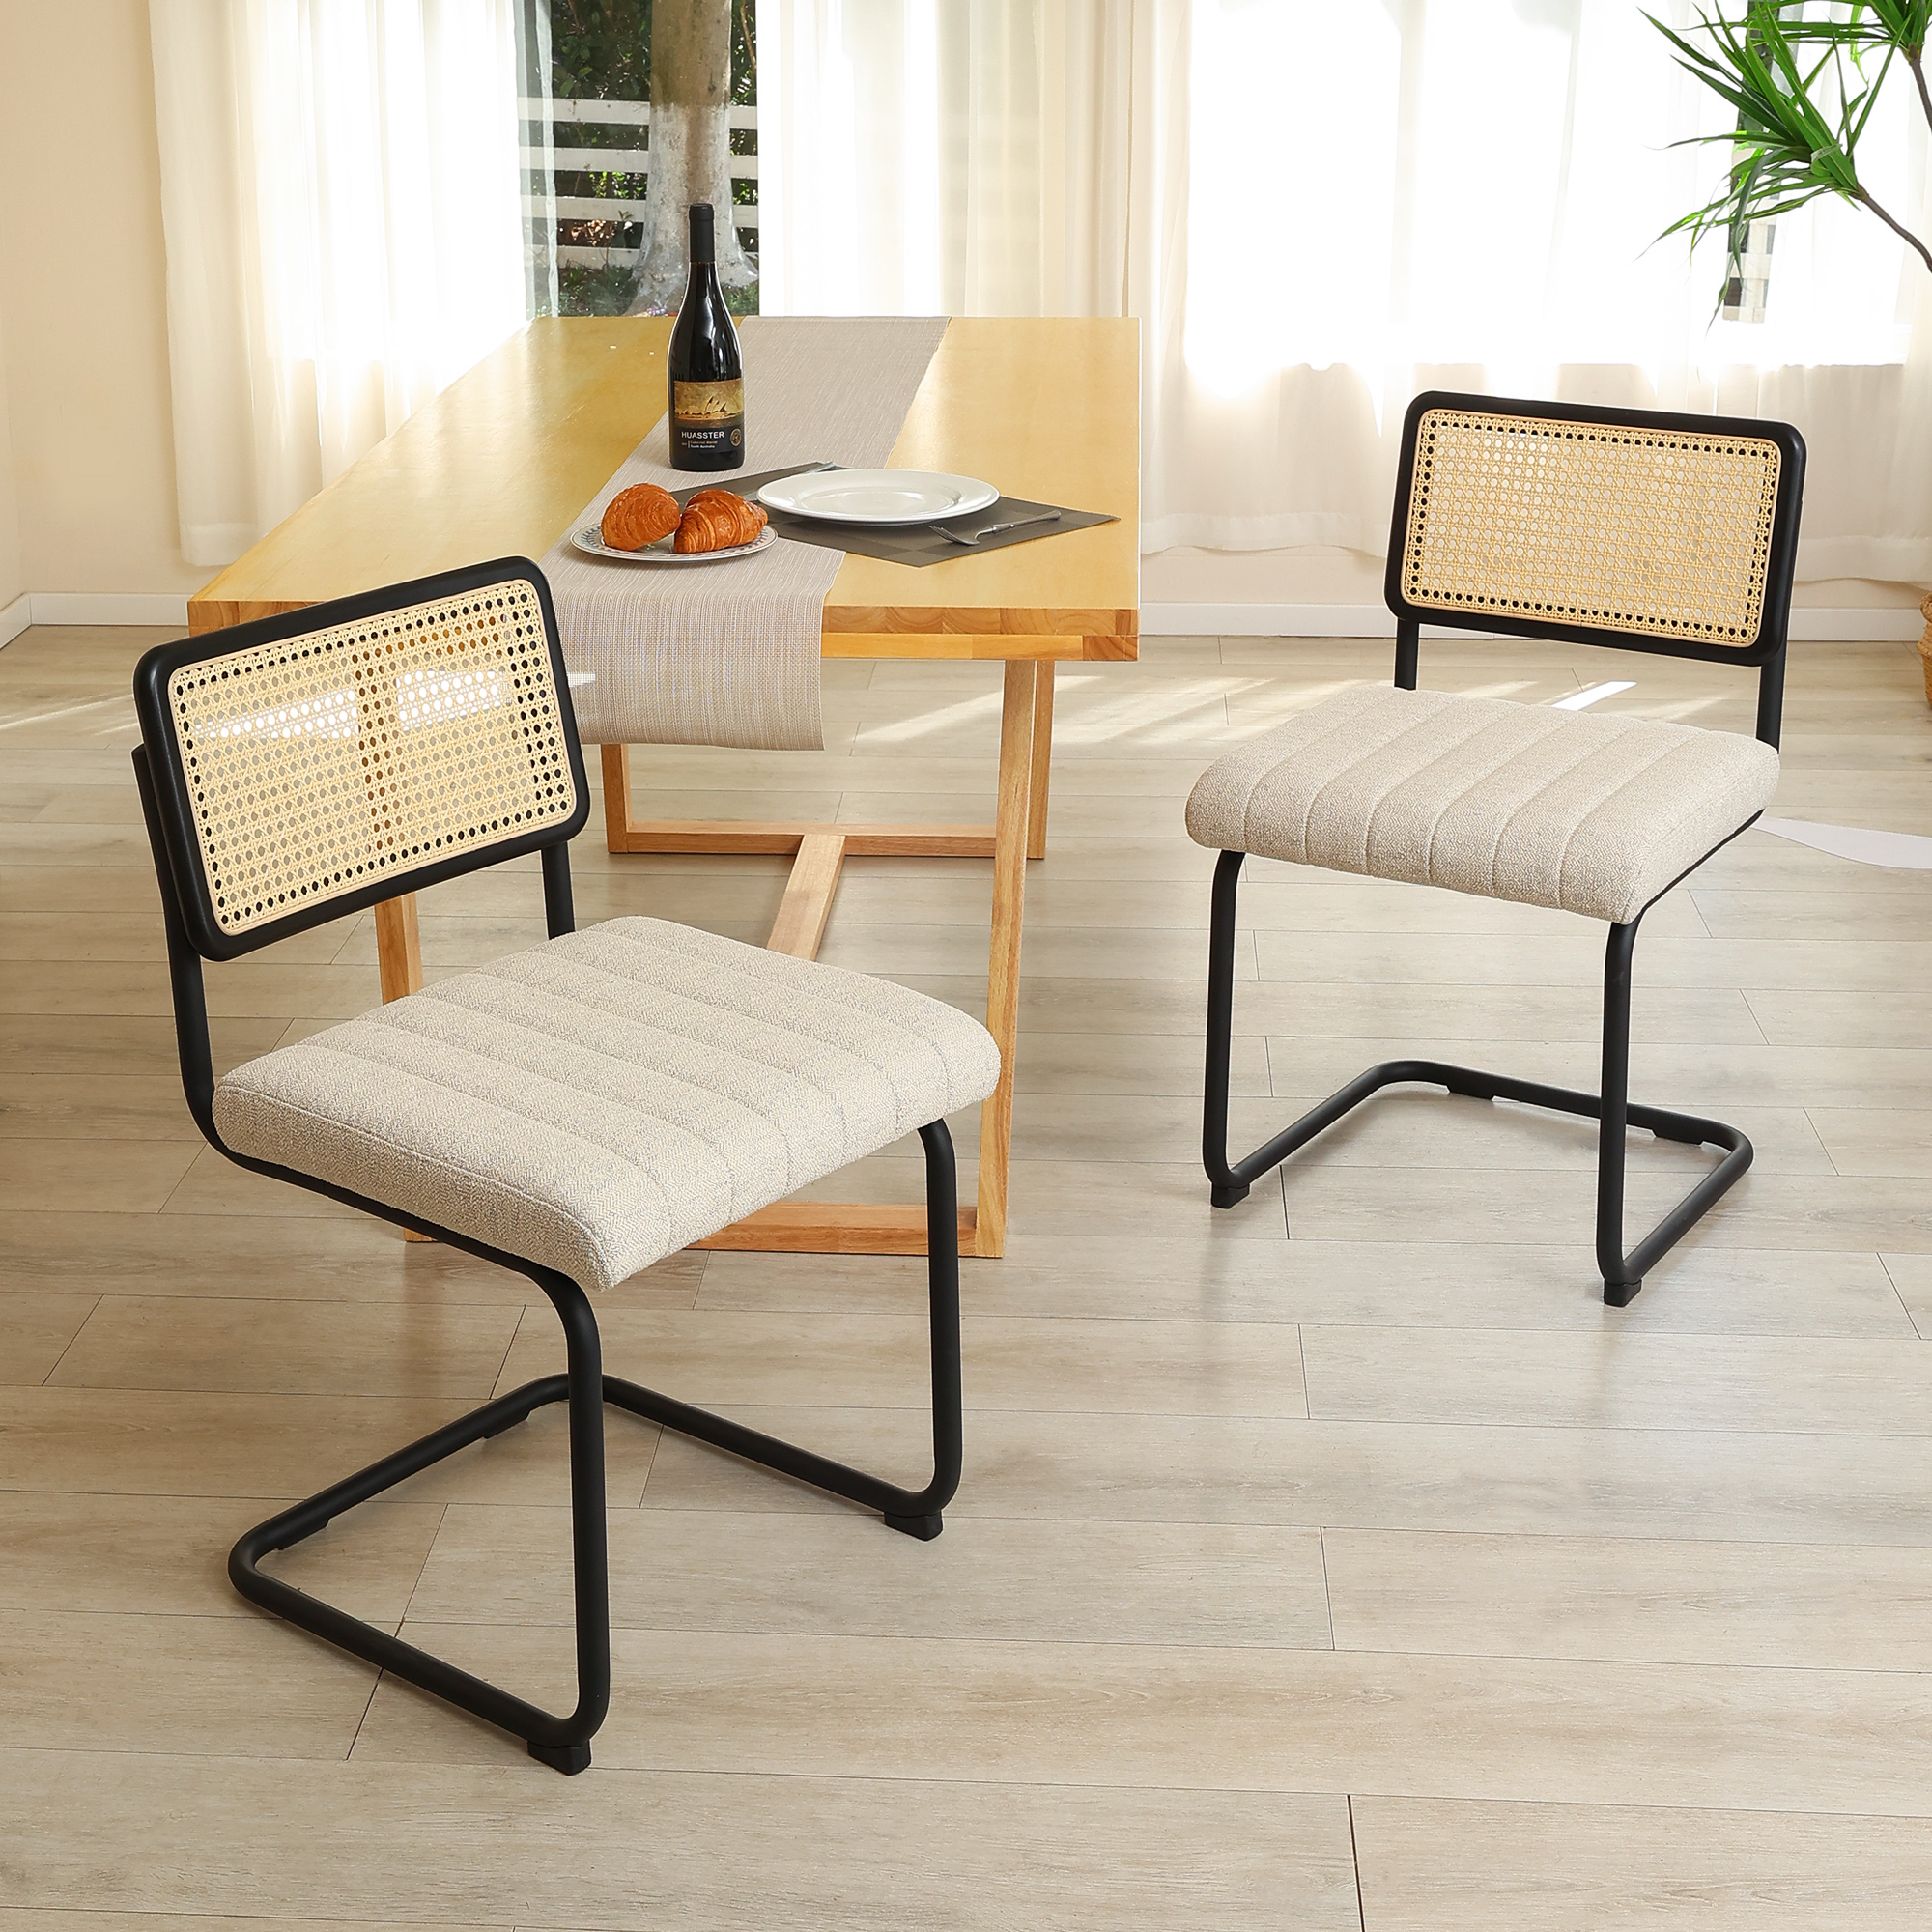 Zesthouse Beige Linen Dining Chairs Set of 2, Rattan Upholstered Kitchen Chairs with Cane Back and Black Metal Legs, Mid-Century Modern Side Chair for Dining Living Room - image 3 of 13